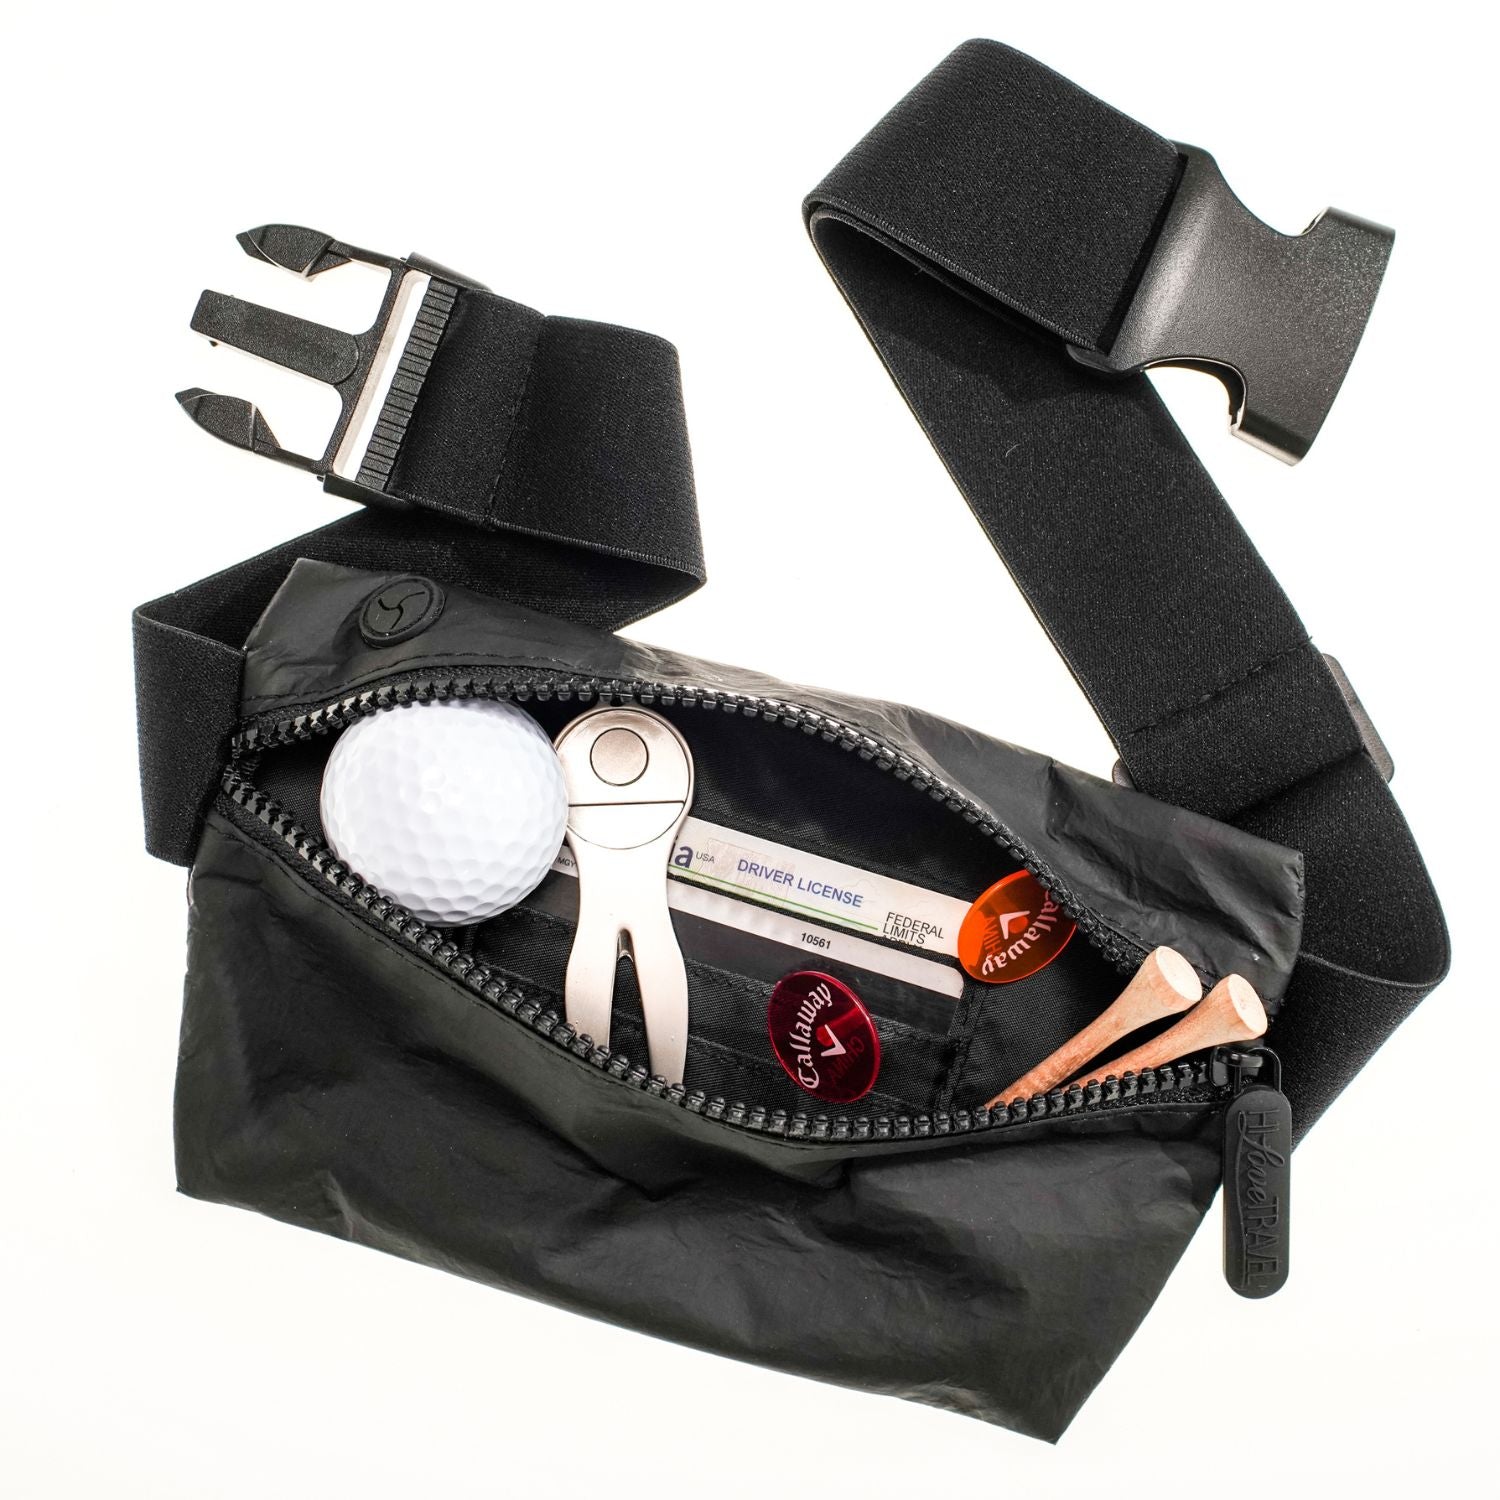 Silver Fanny Pack - Crossover Bag or Fitness Fanny Pack - Black Star